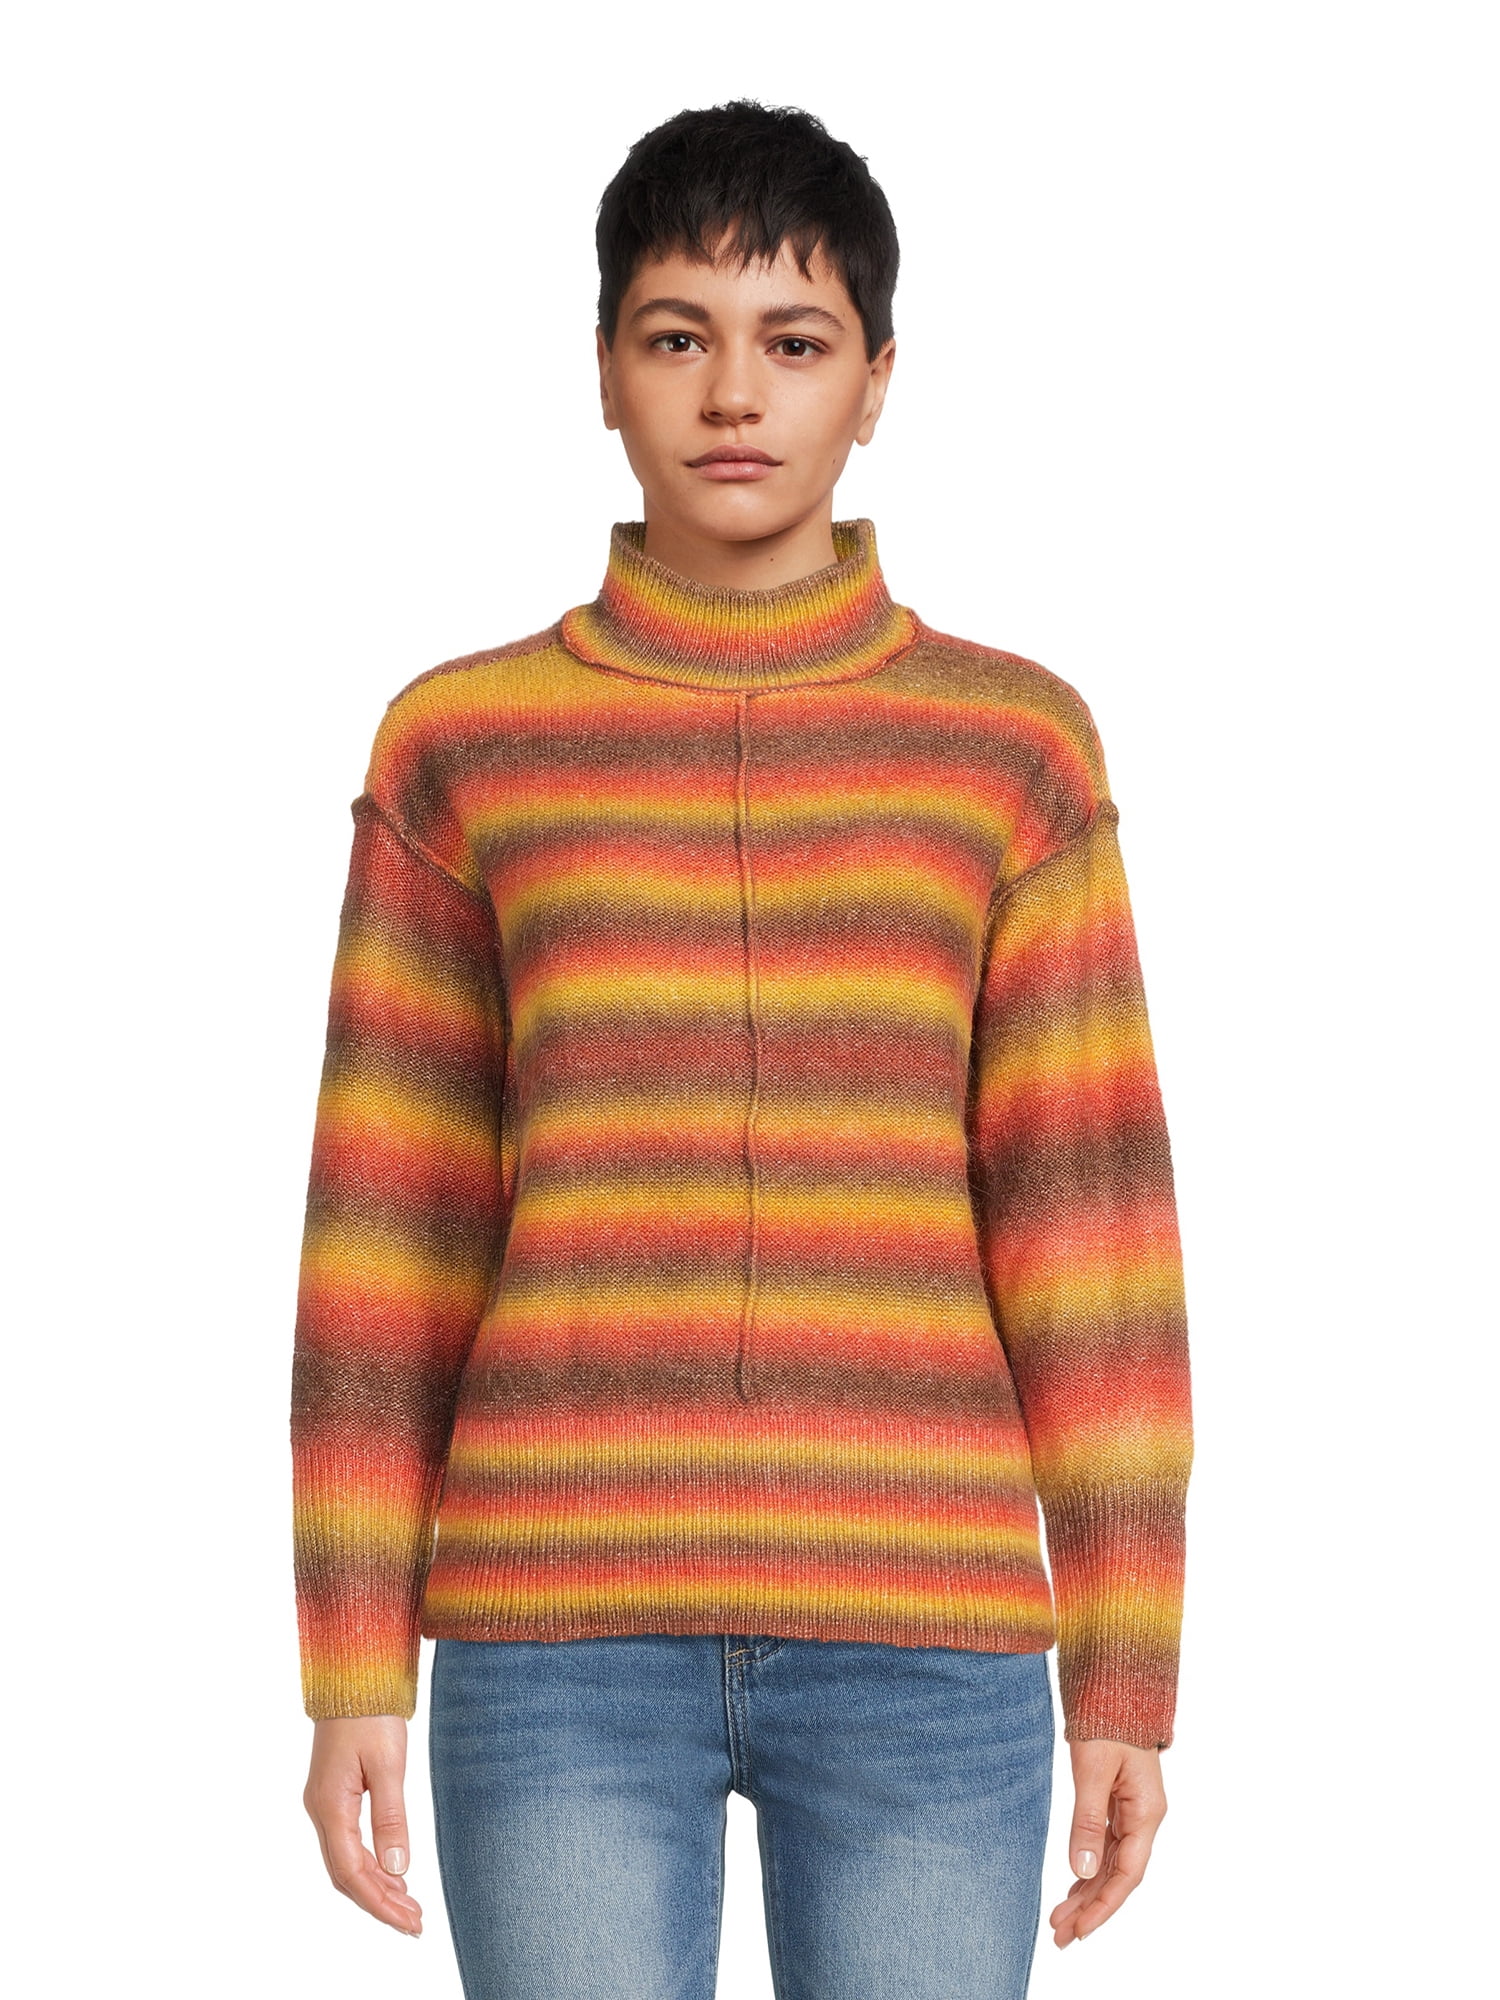 BeachLunchLounge Women's Rainbow Ombre Mock Neck Sweater, Midweight